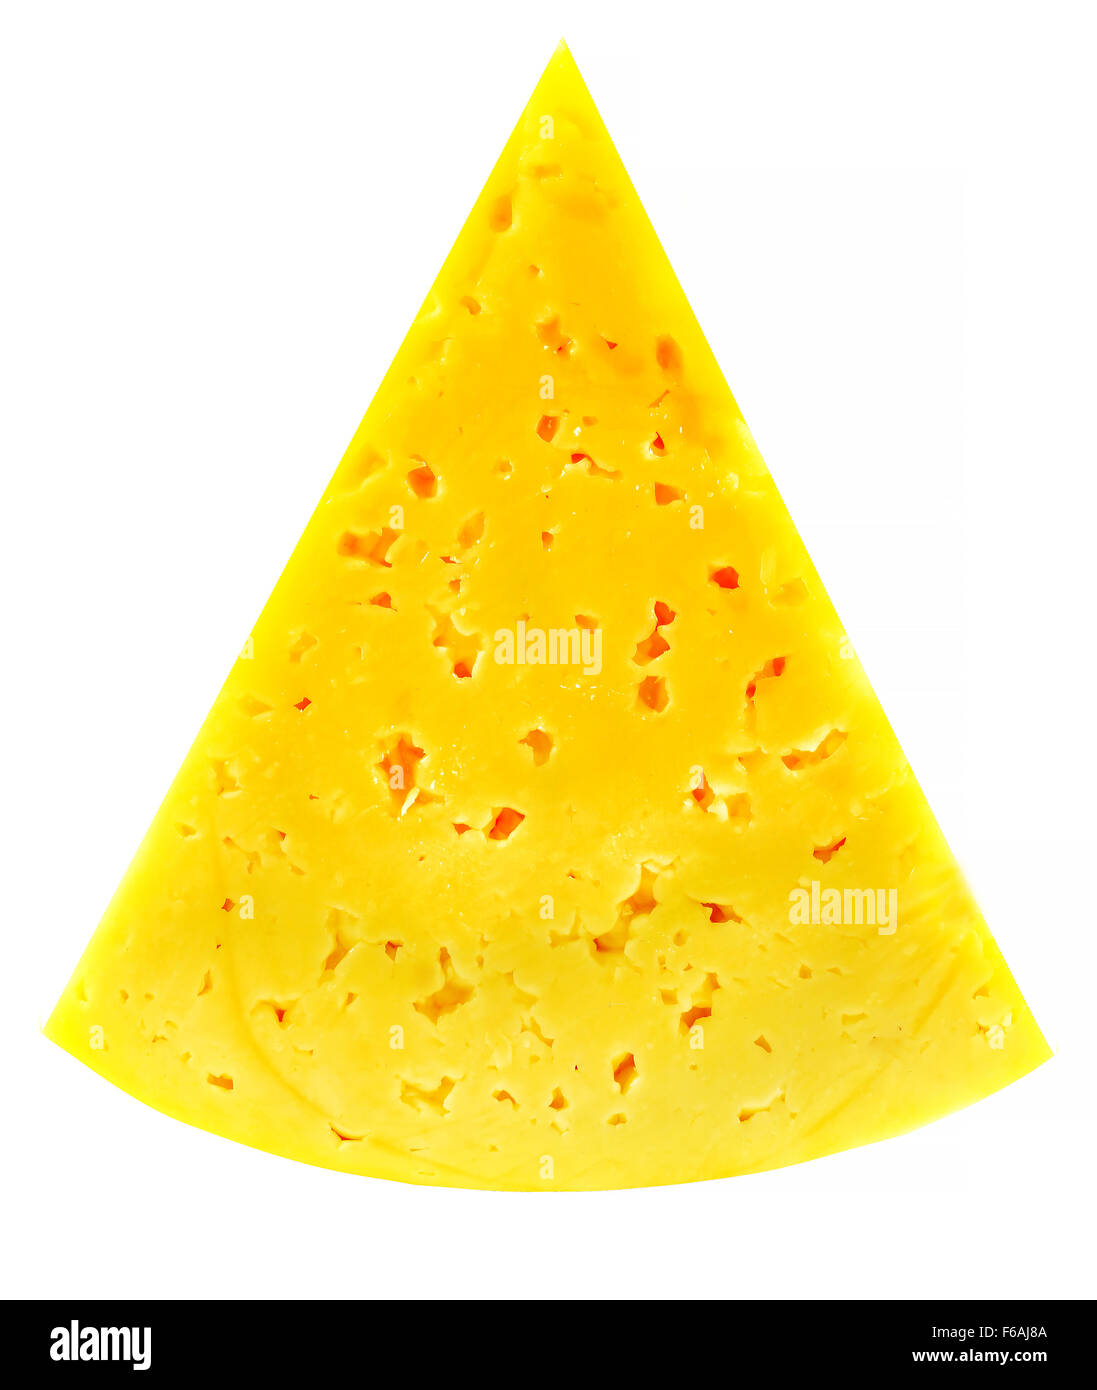 Yellow cheese photographed Stock Photo